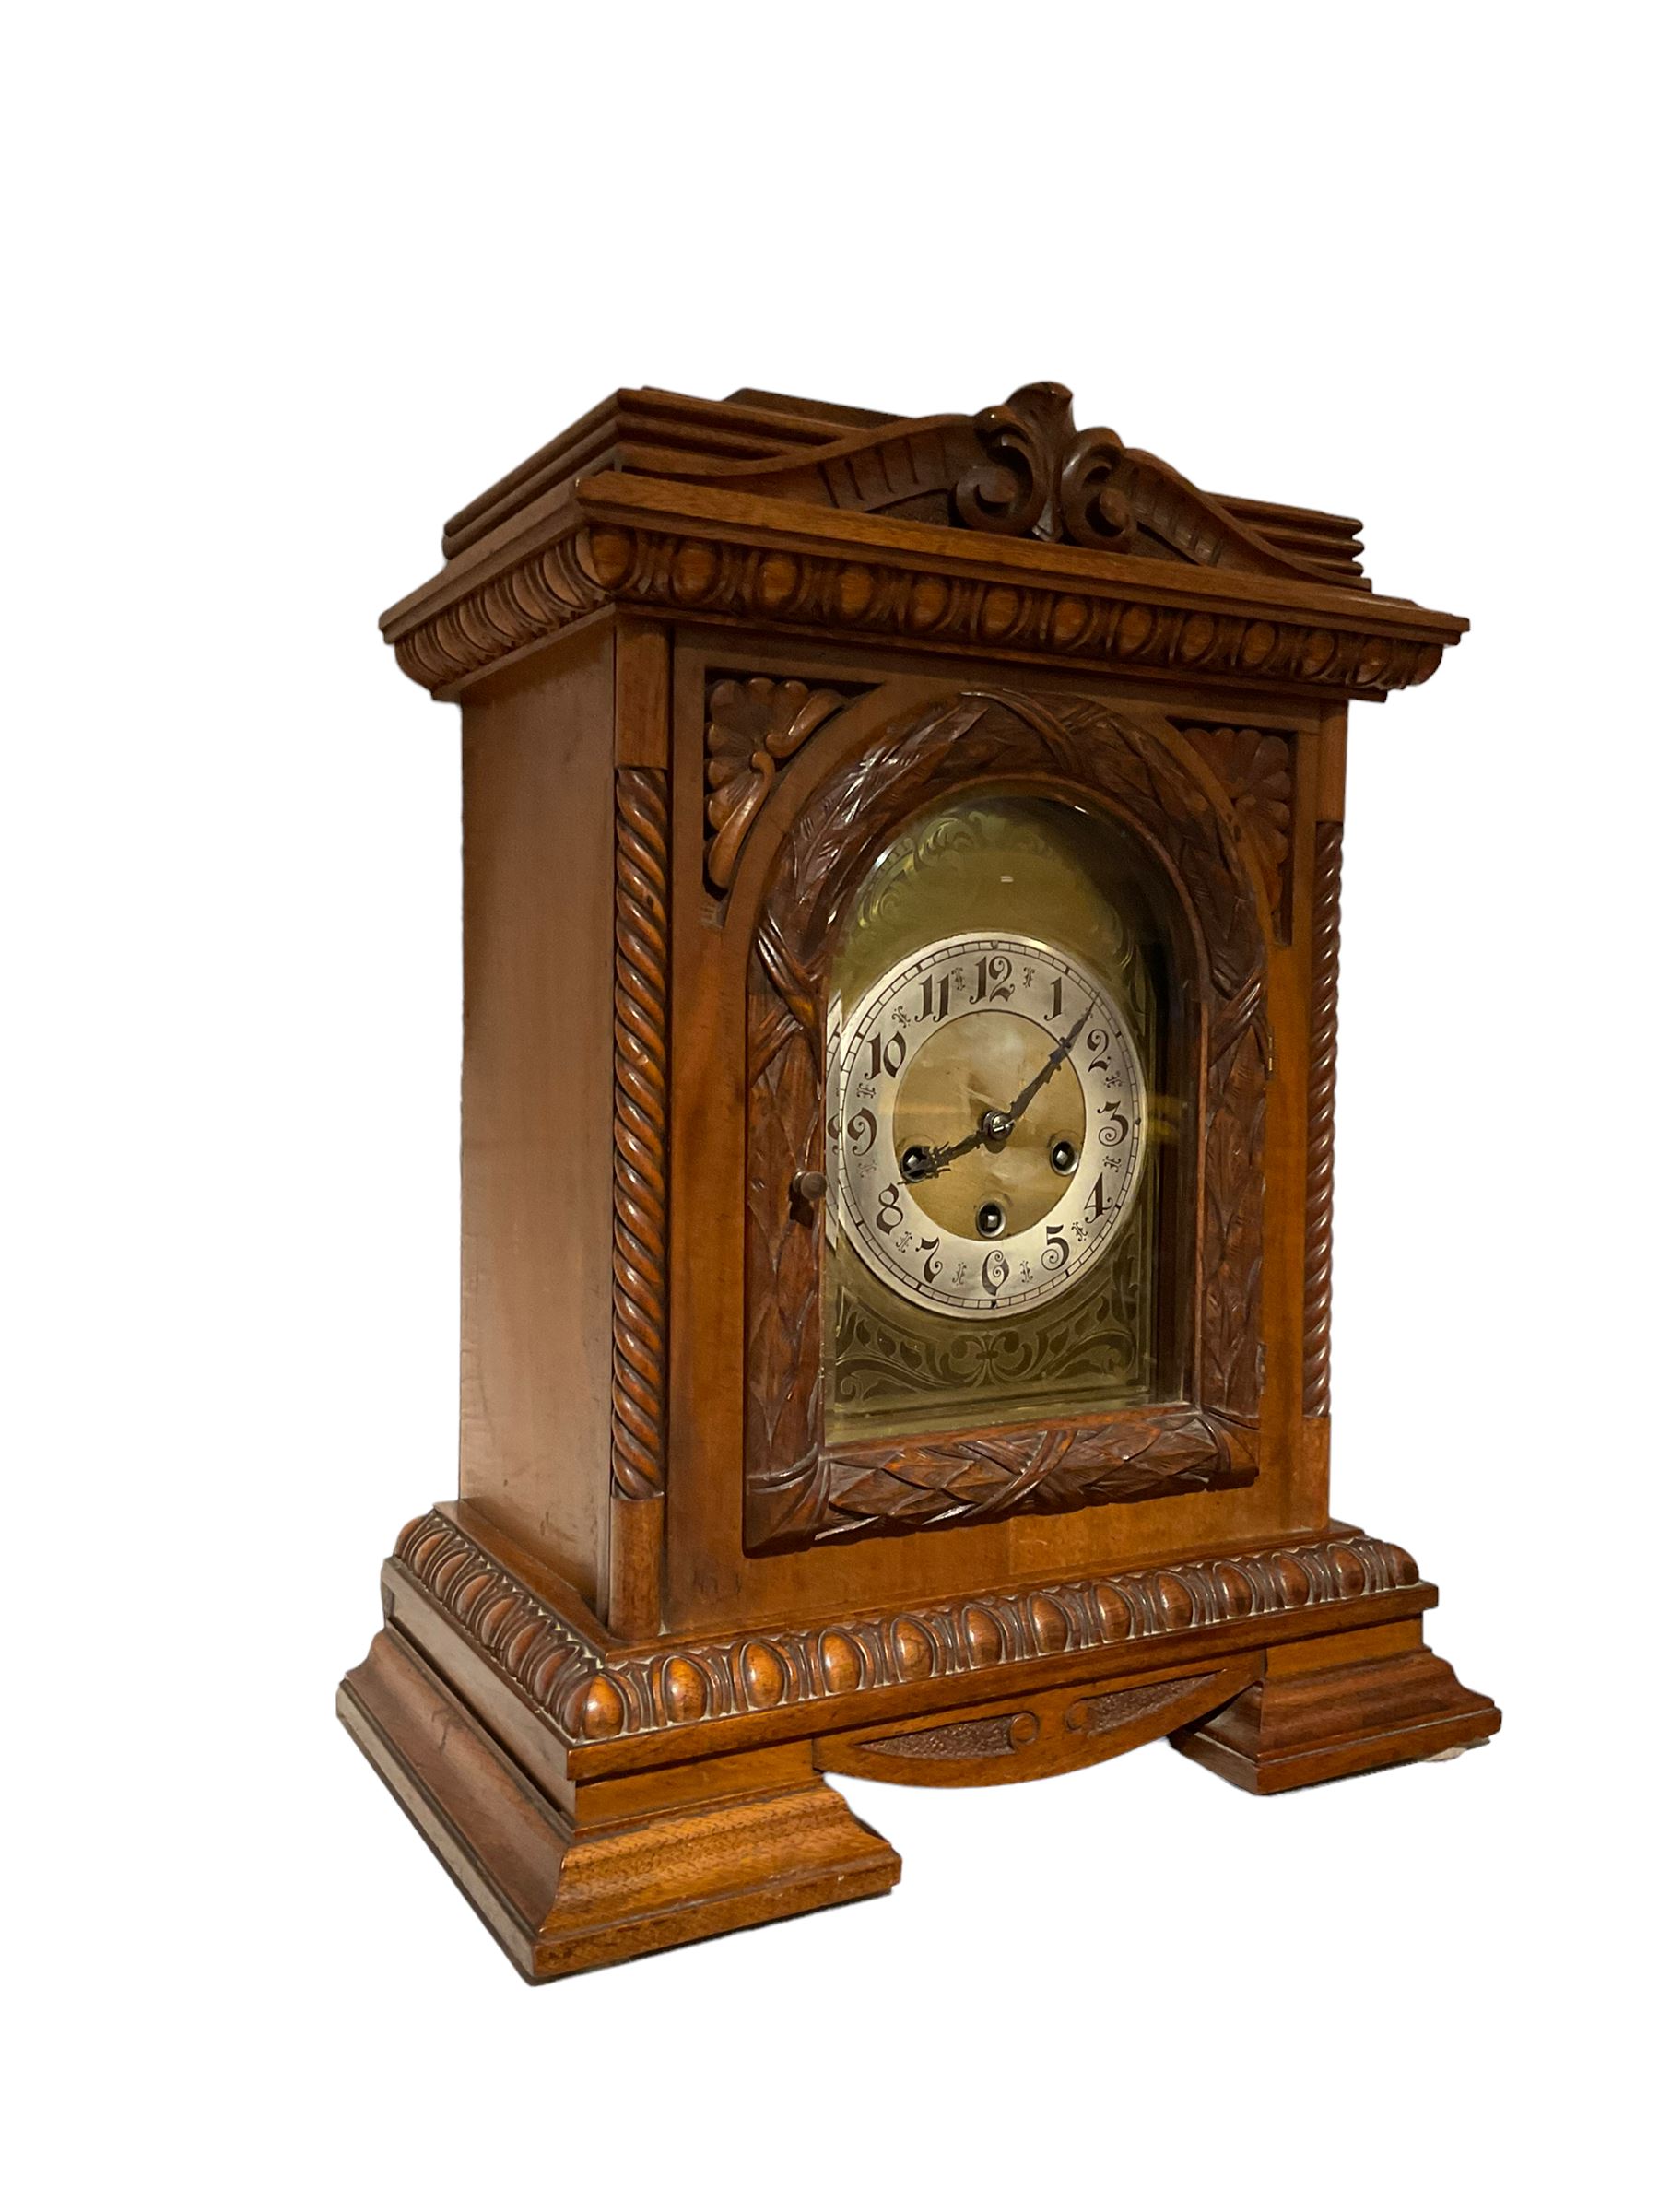 German - early 20th century 8-day chiming mantle clock in a carved oak case - Image 2 of 3